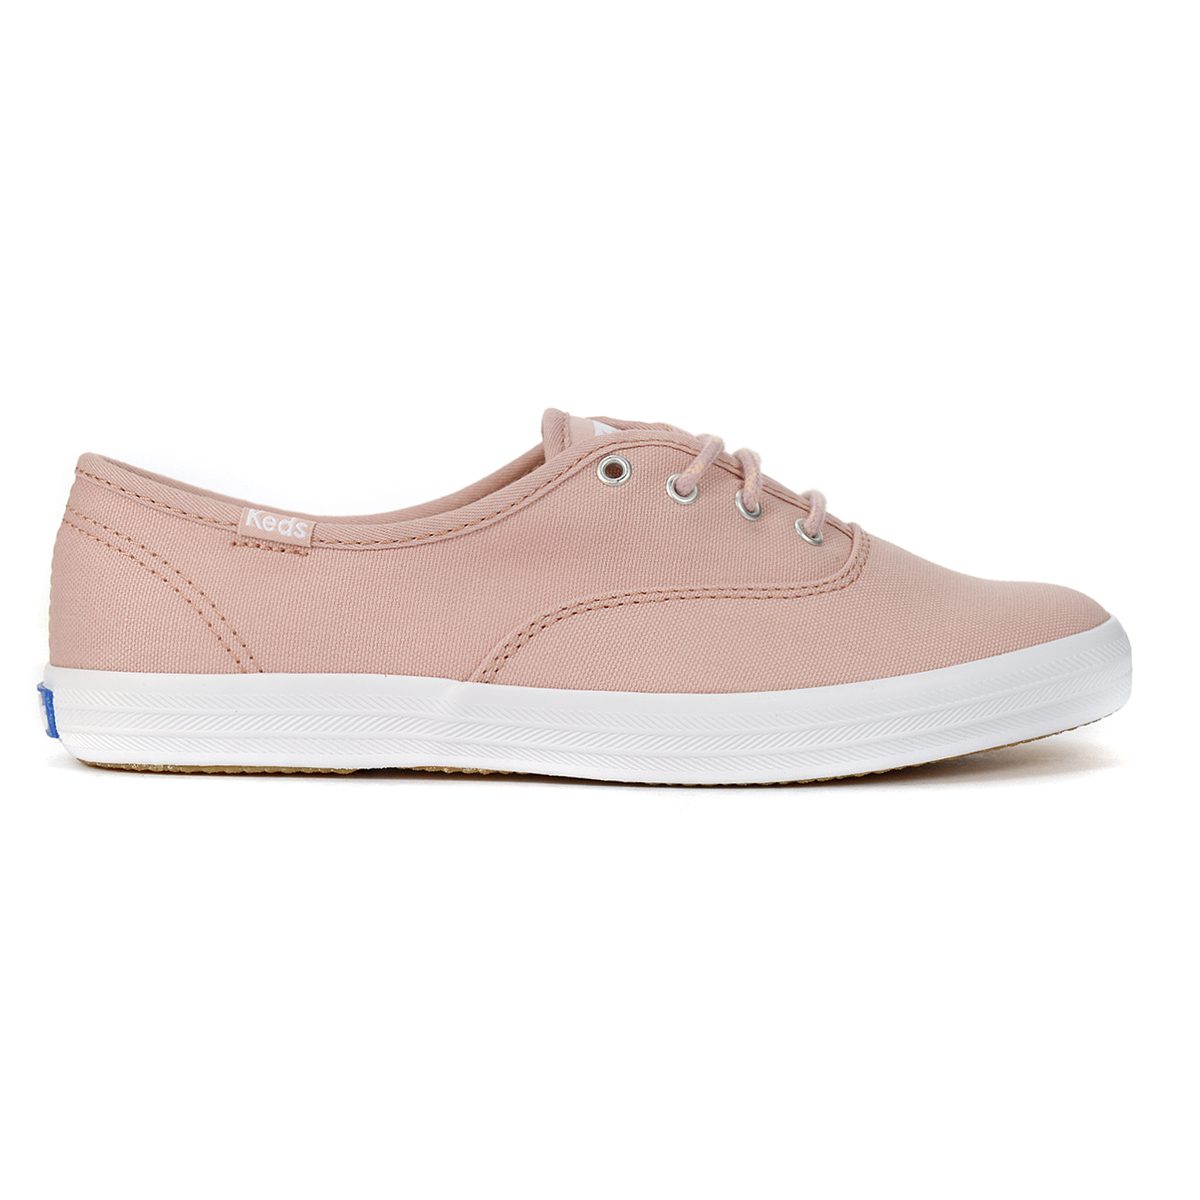 Keds Women's Champion Fall Solids Pale Mauve Sneakers WF64026 NEW! | eBay